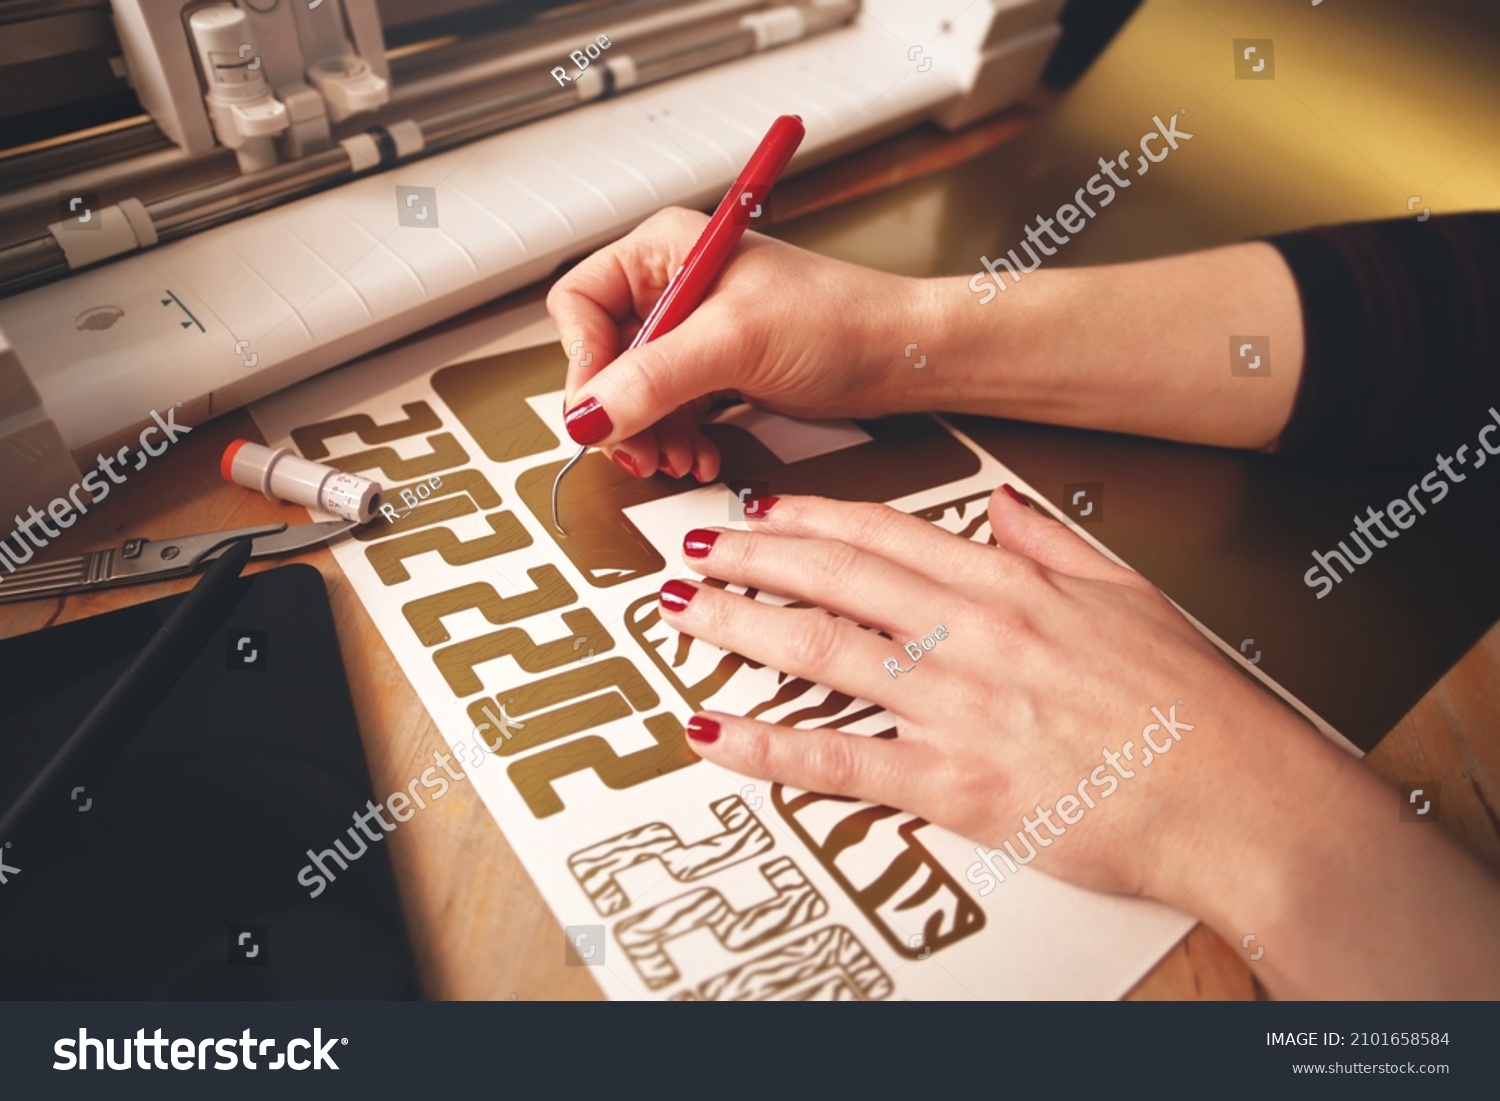 woman with red painted nails removes excess material with weeding tool to make 2022 tiger design stickers from gold vinyl foil. workplace with cutting machine, tools, tablet computer. selective focus #2101658584